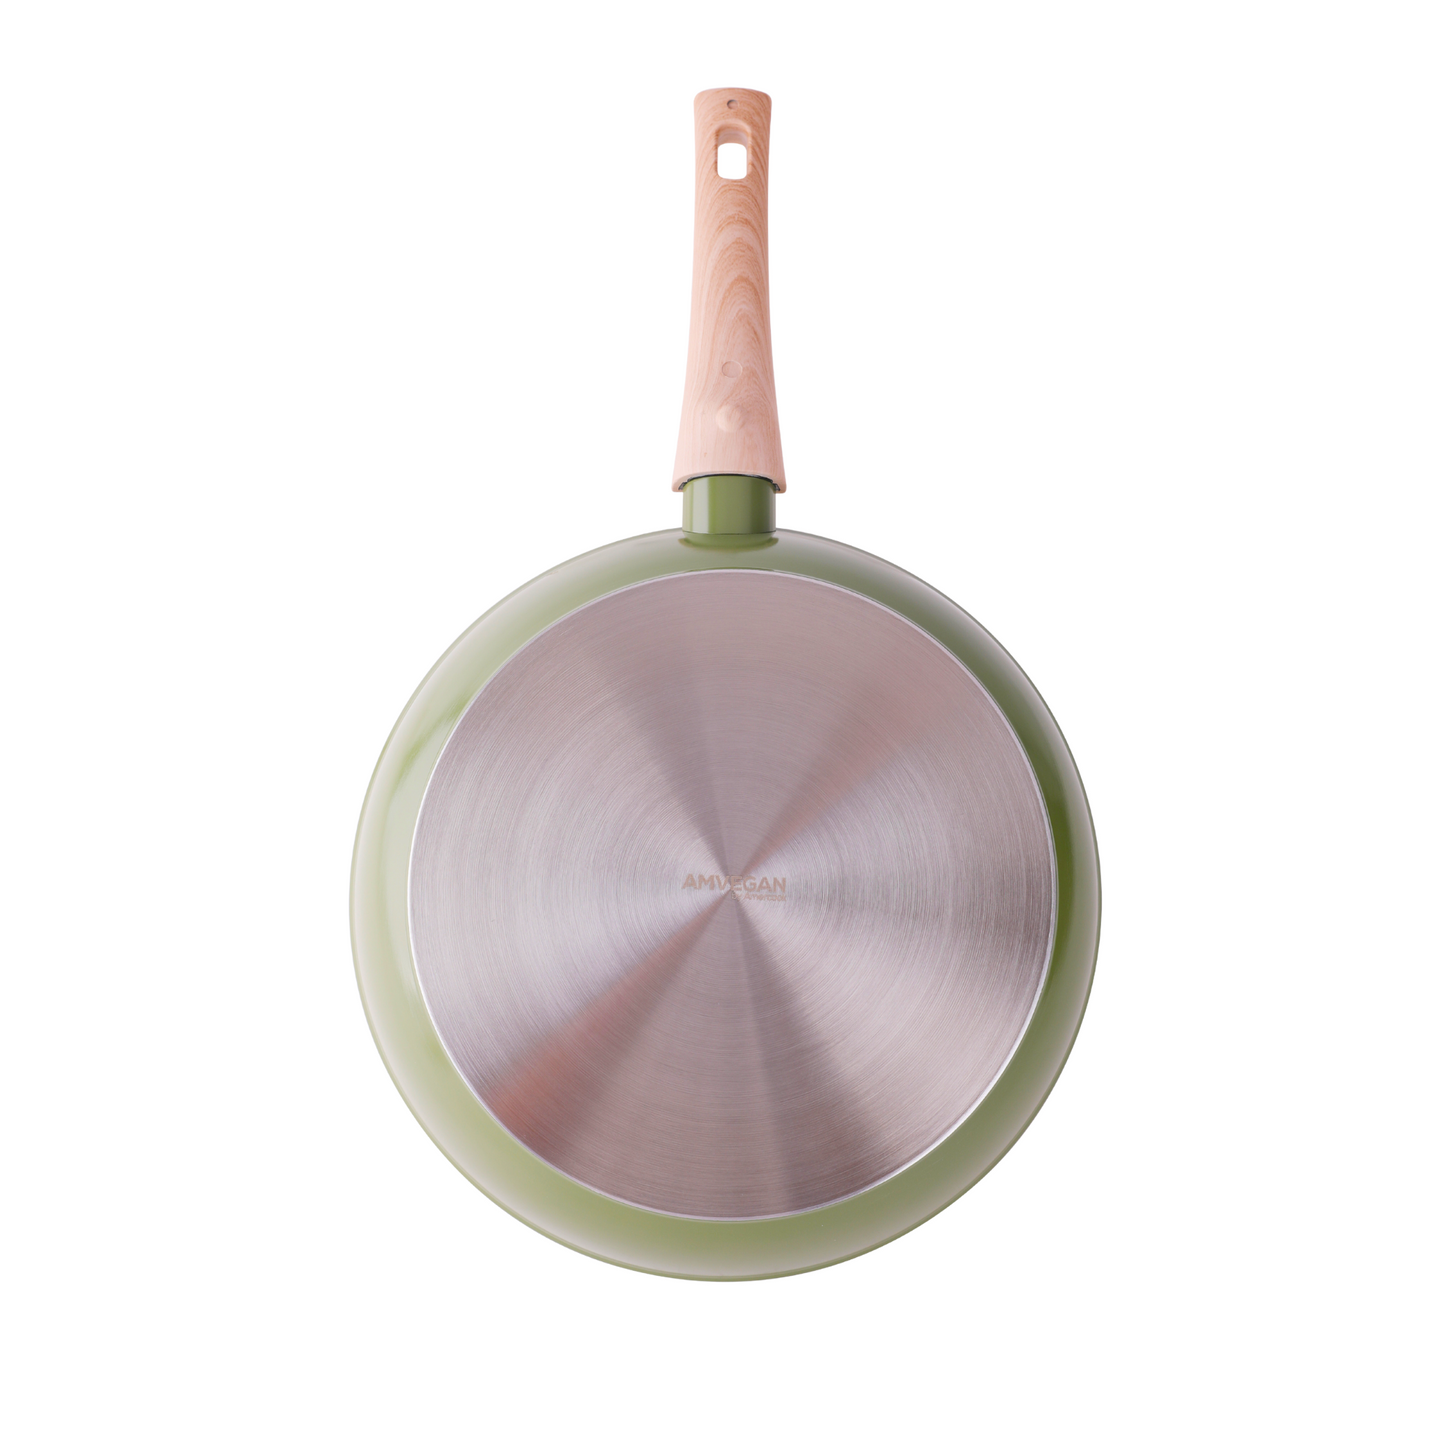 AmVegan deep frying pan with removable handle, suitable for oven and all types of cookers, including induction 